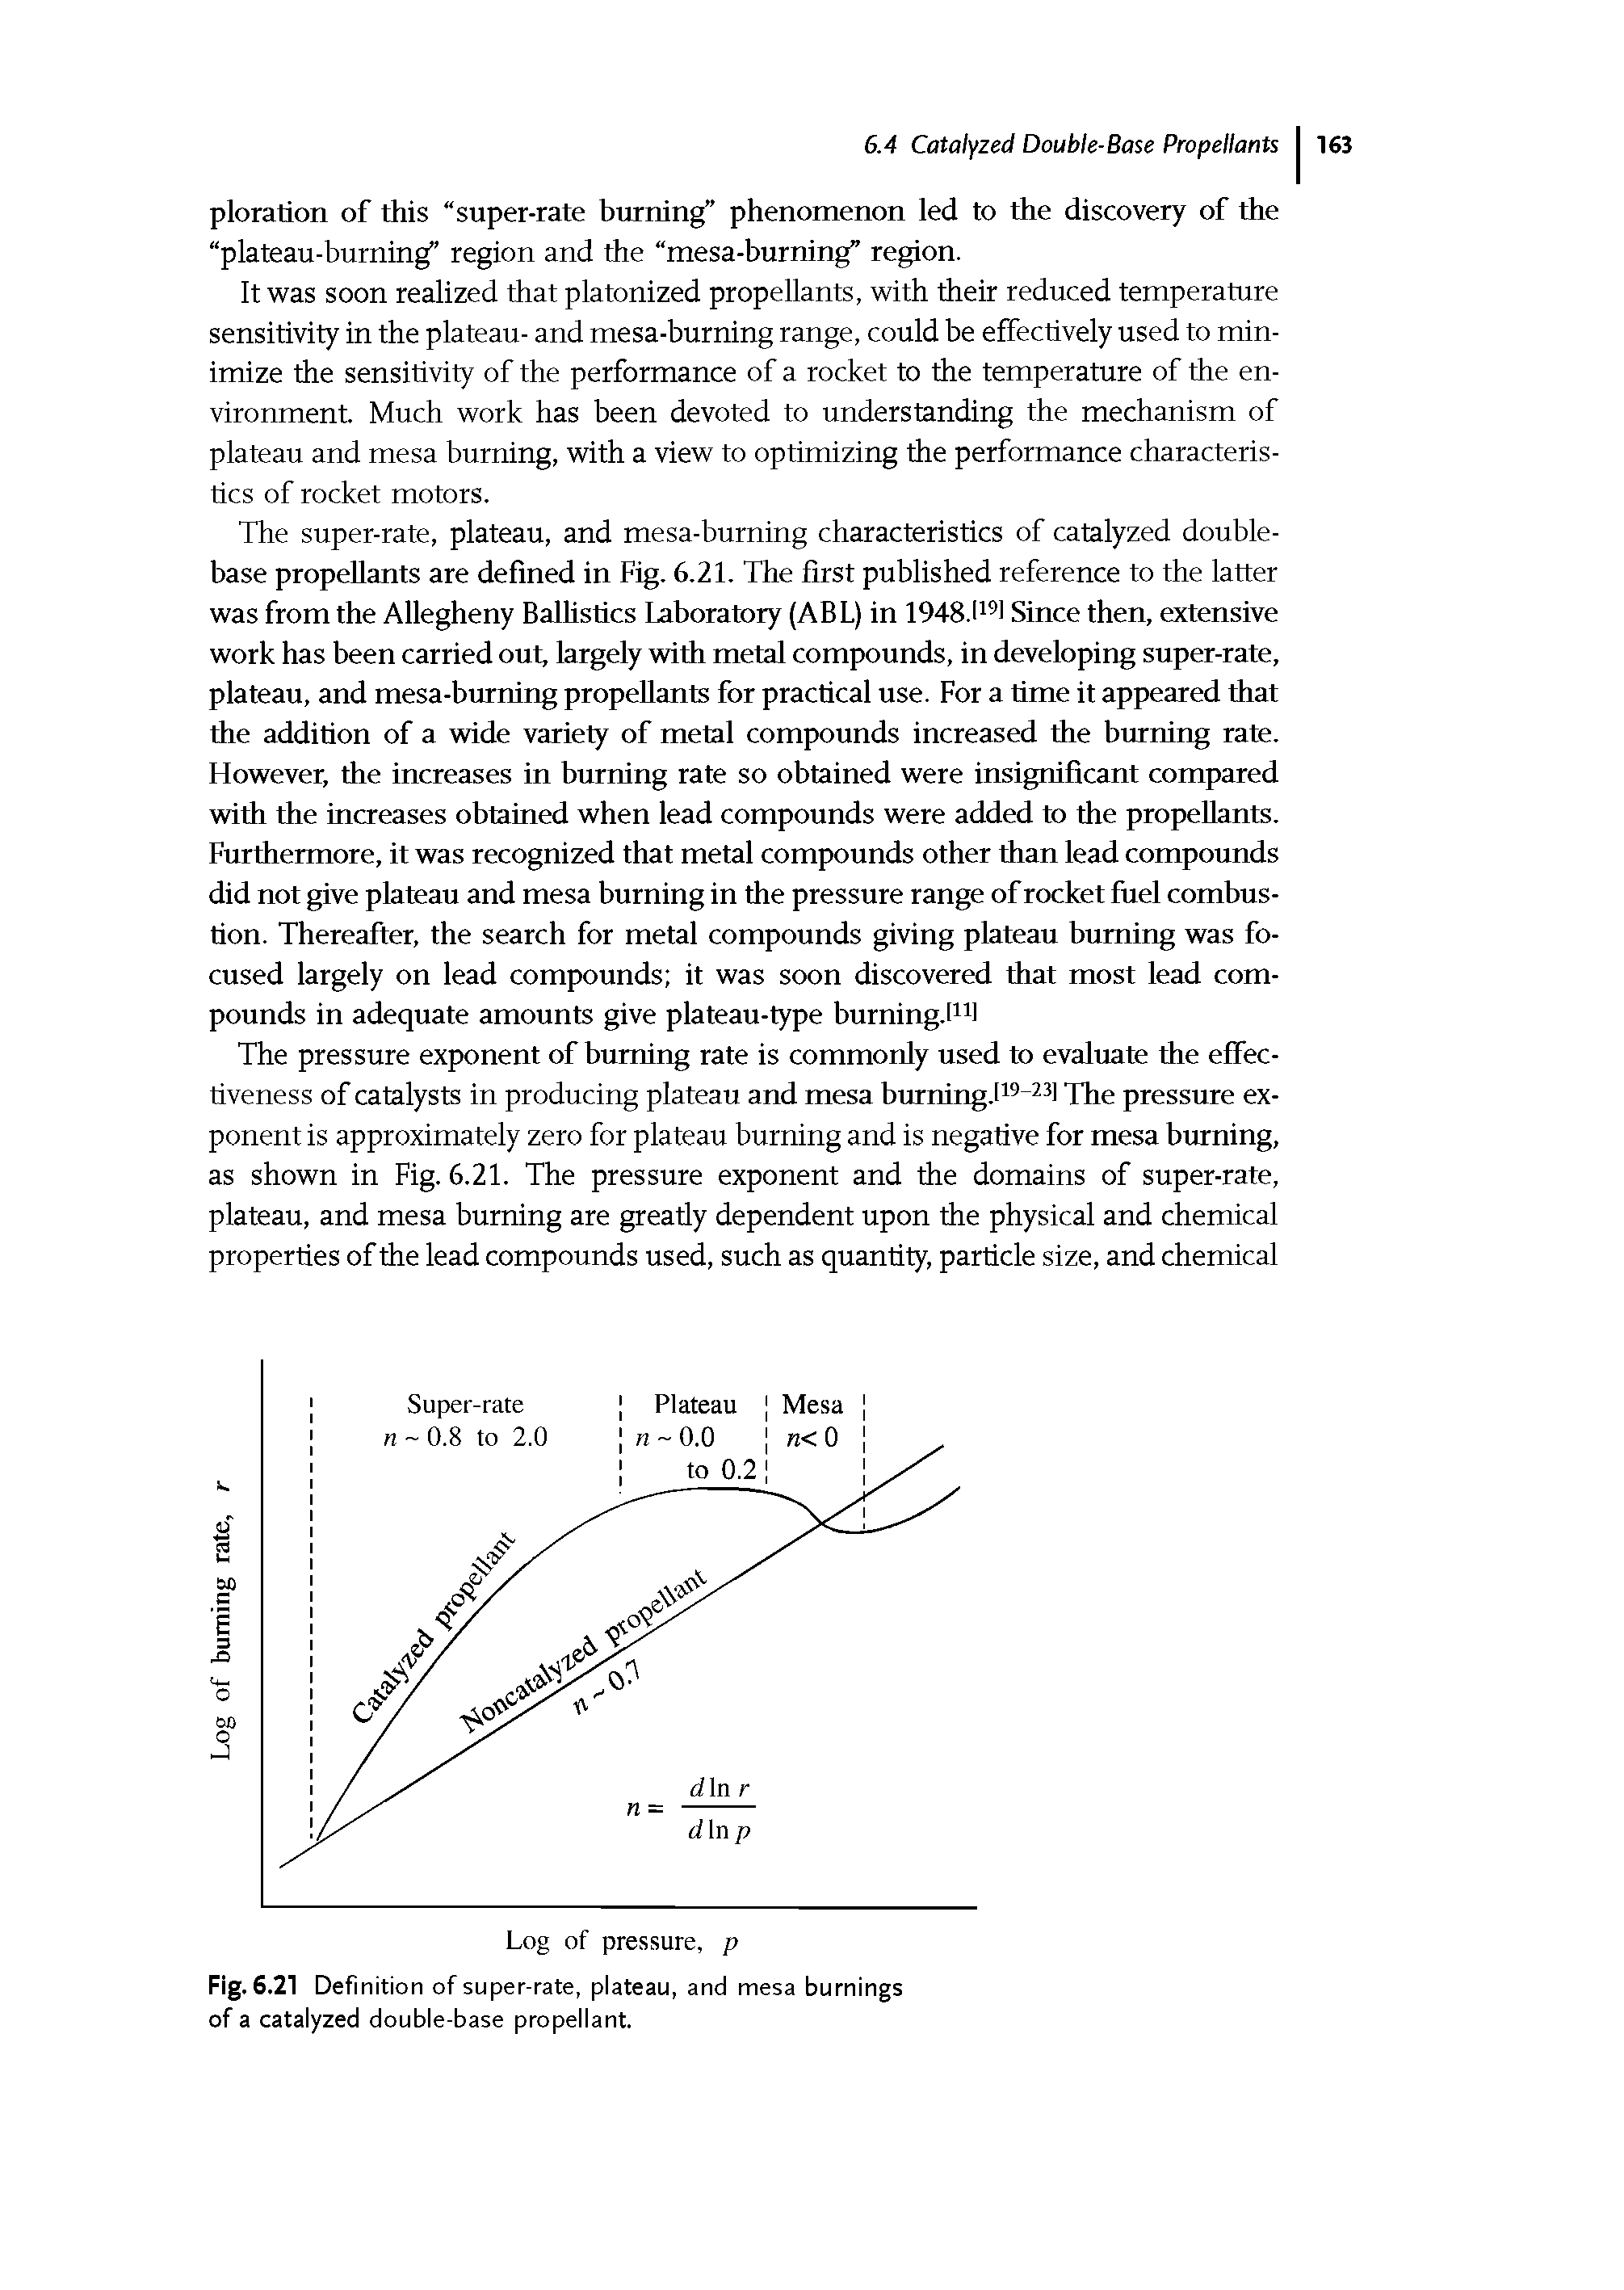 Fig. 6.21 Definition of super-rate, plateau, and mesa burnings of a catalyzed double-base propellant.